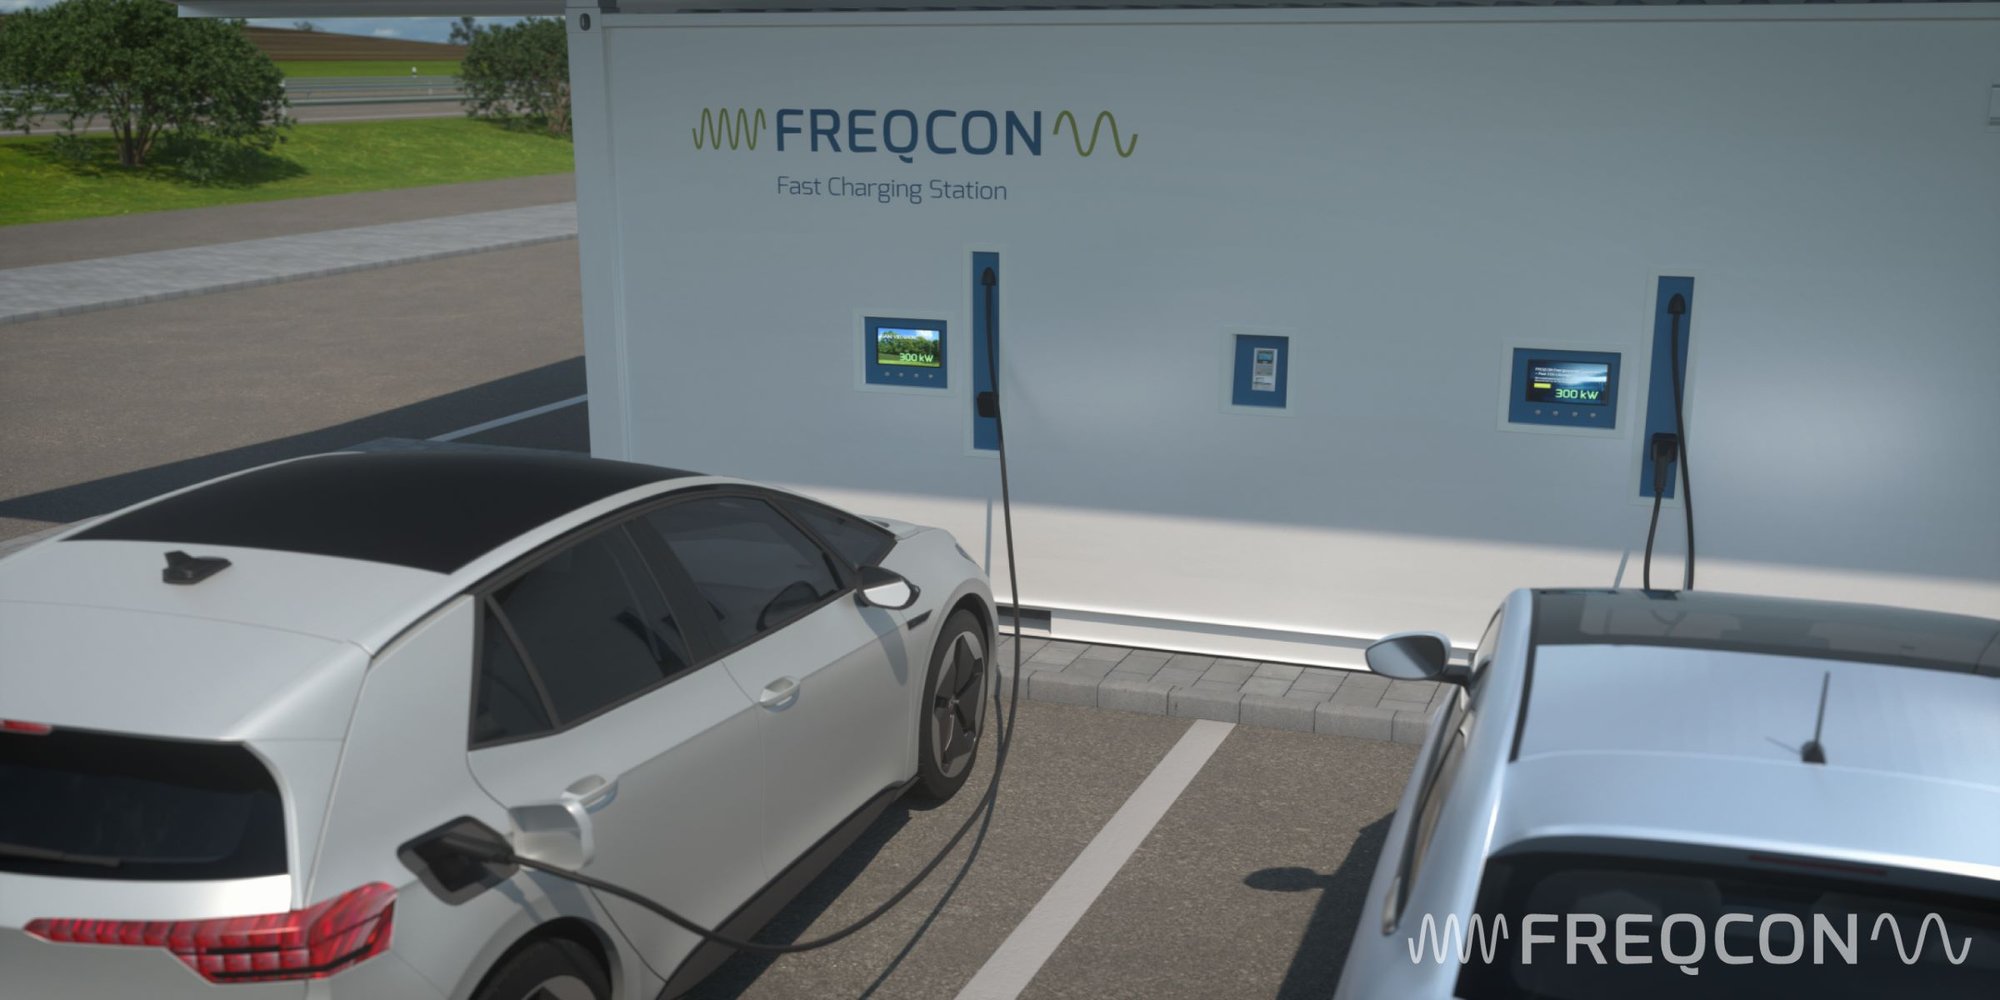 Provide fast electric vehicle charging with Fast Charging Station